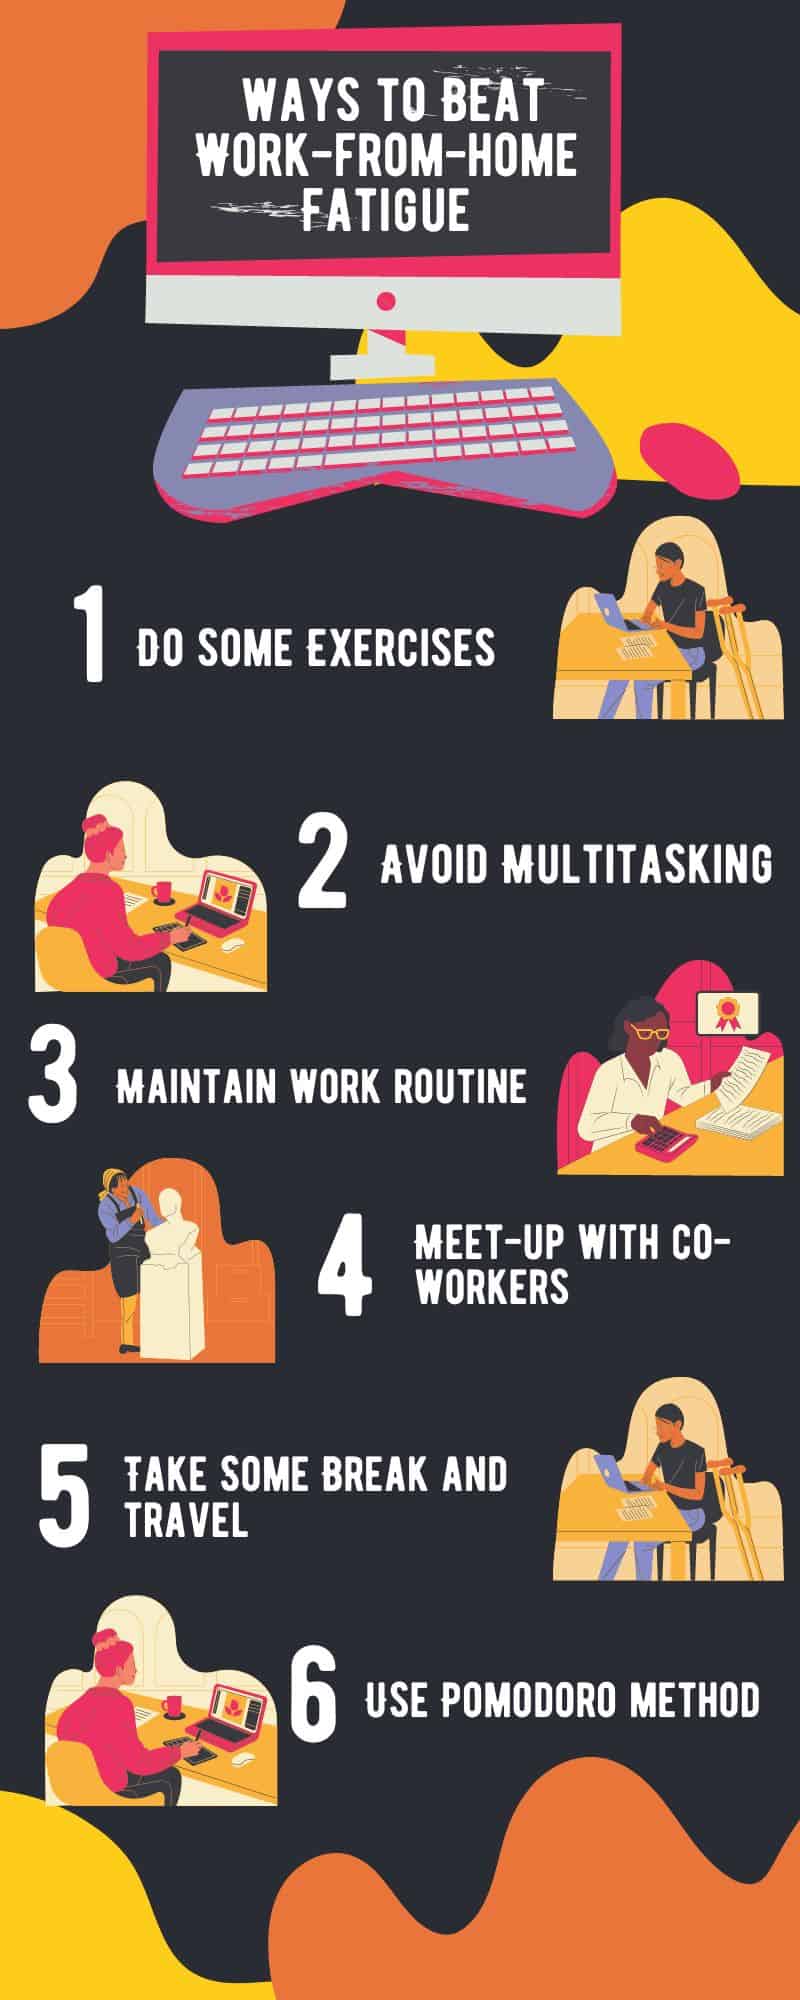 Ways to beat work from home fatigue